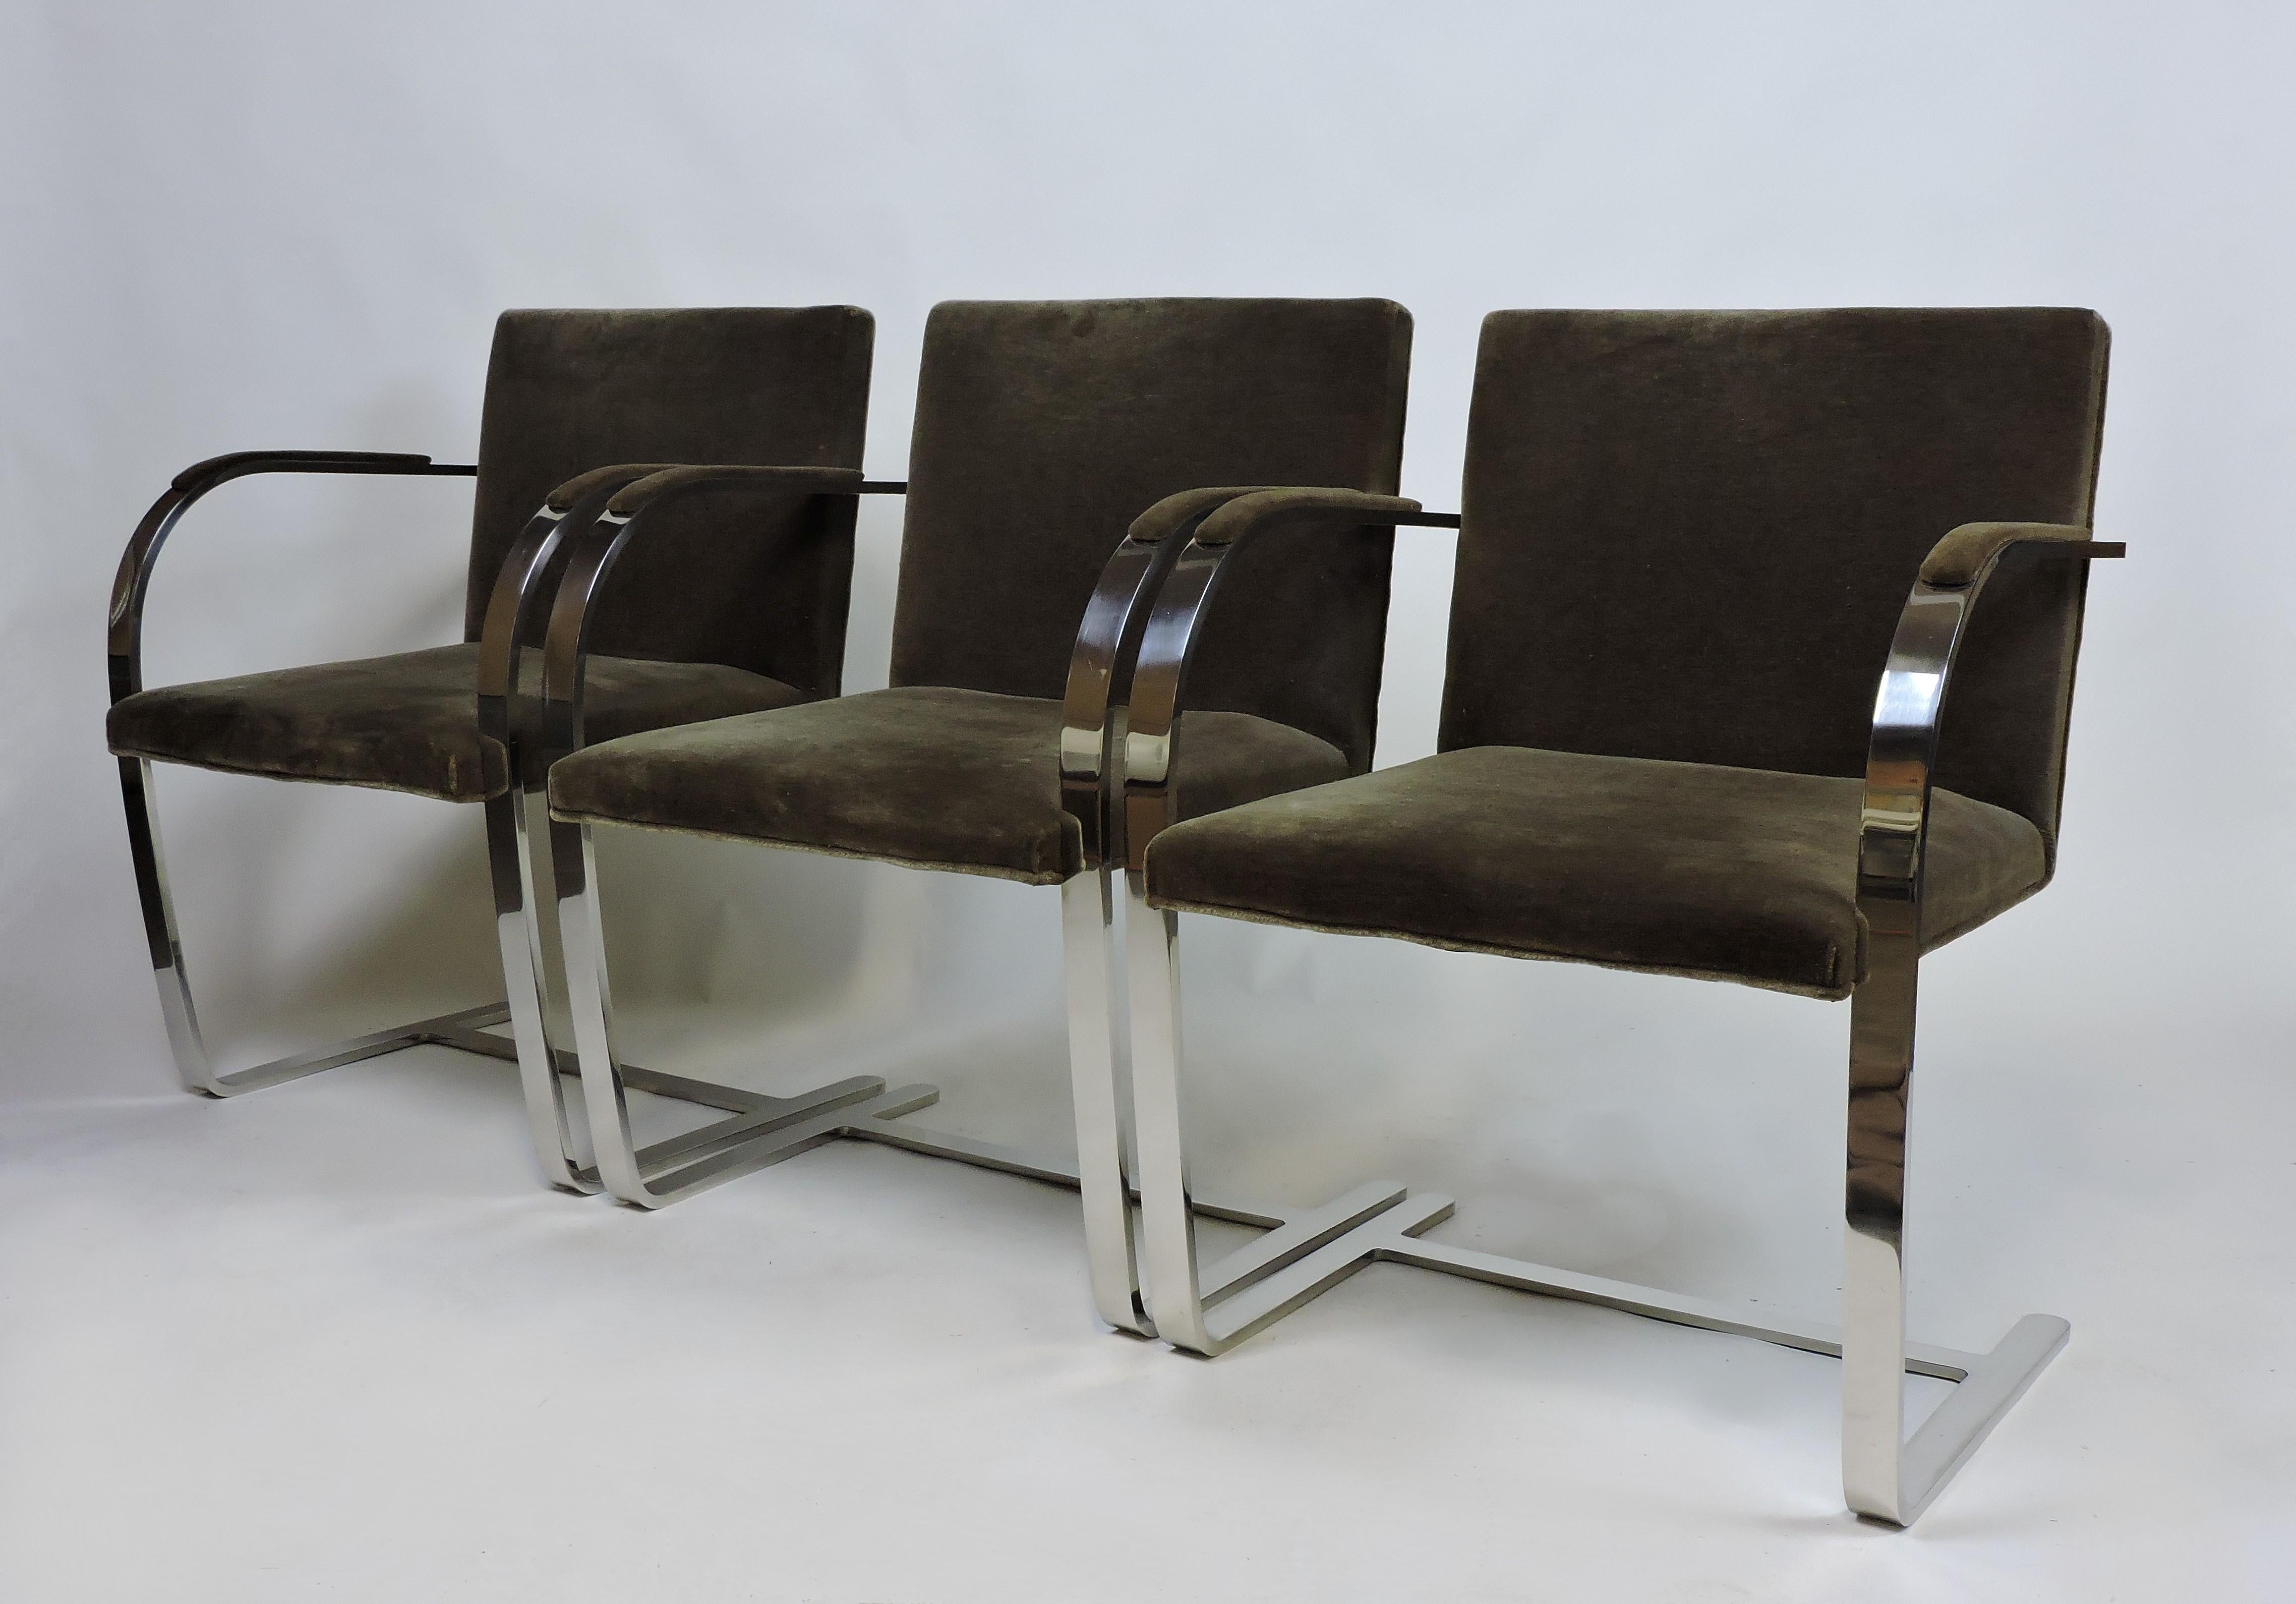 Classic Brno chair designed by Ludwig Mies van der Rohe in 1930 and manufactured in the 1970s by Knoll. Simple and elegant cantilevered design that will never go out of style. This chair frame is made of the more expensive solid polished stainless